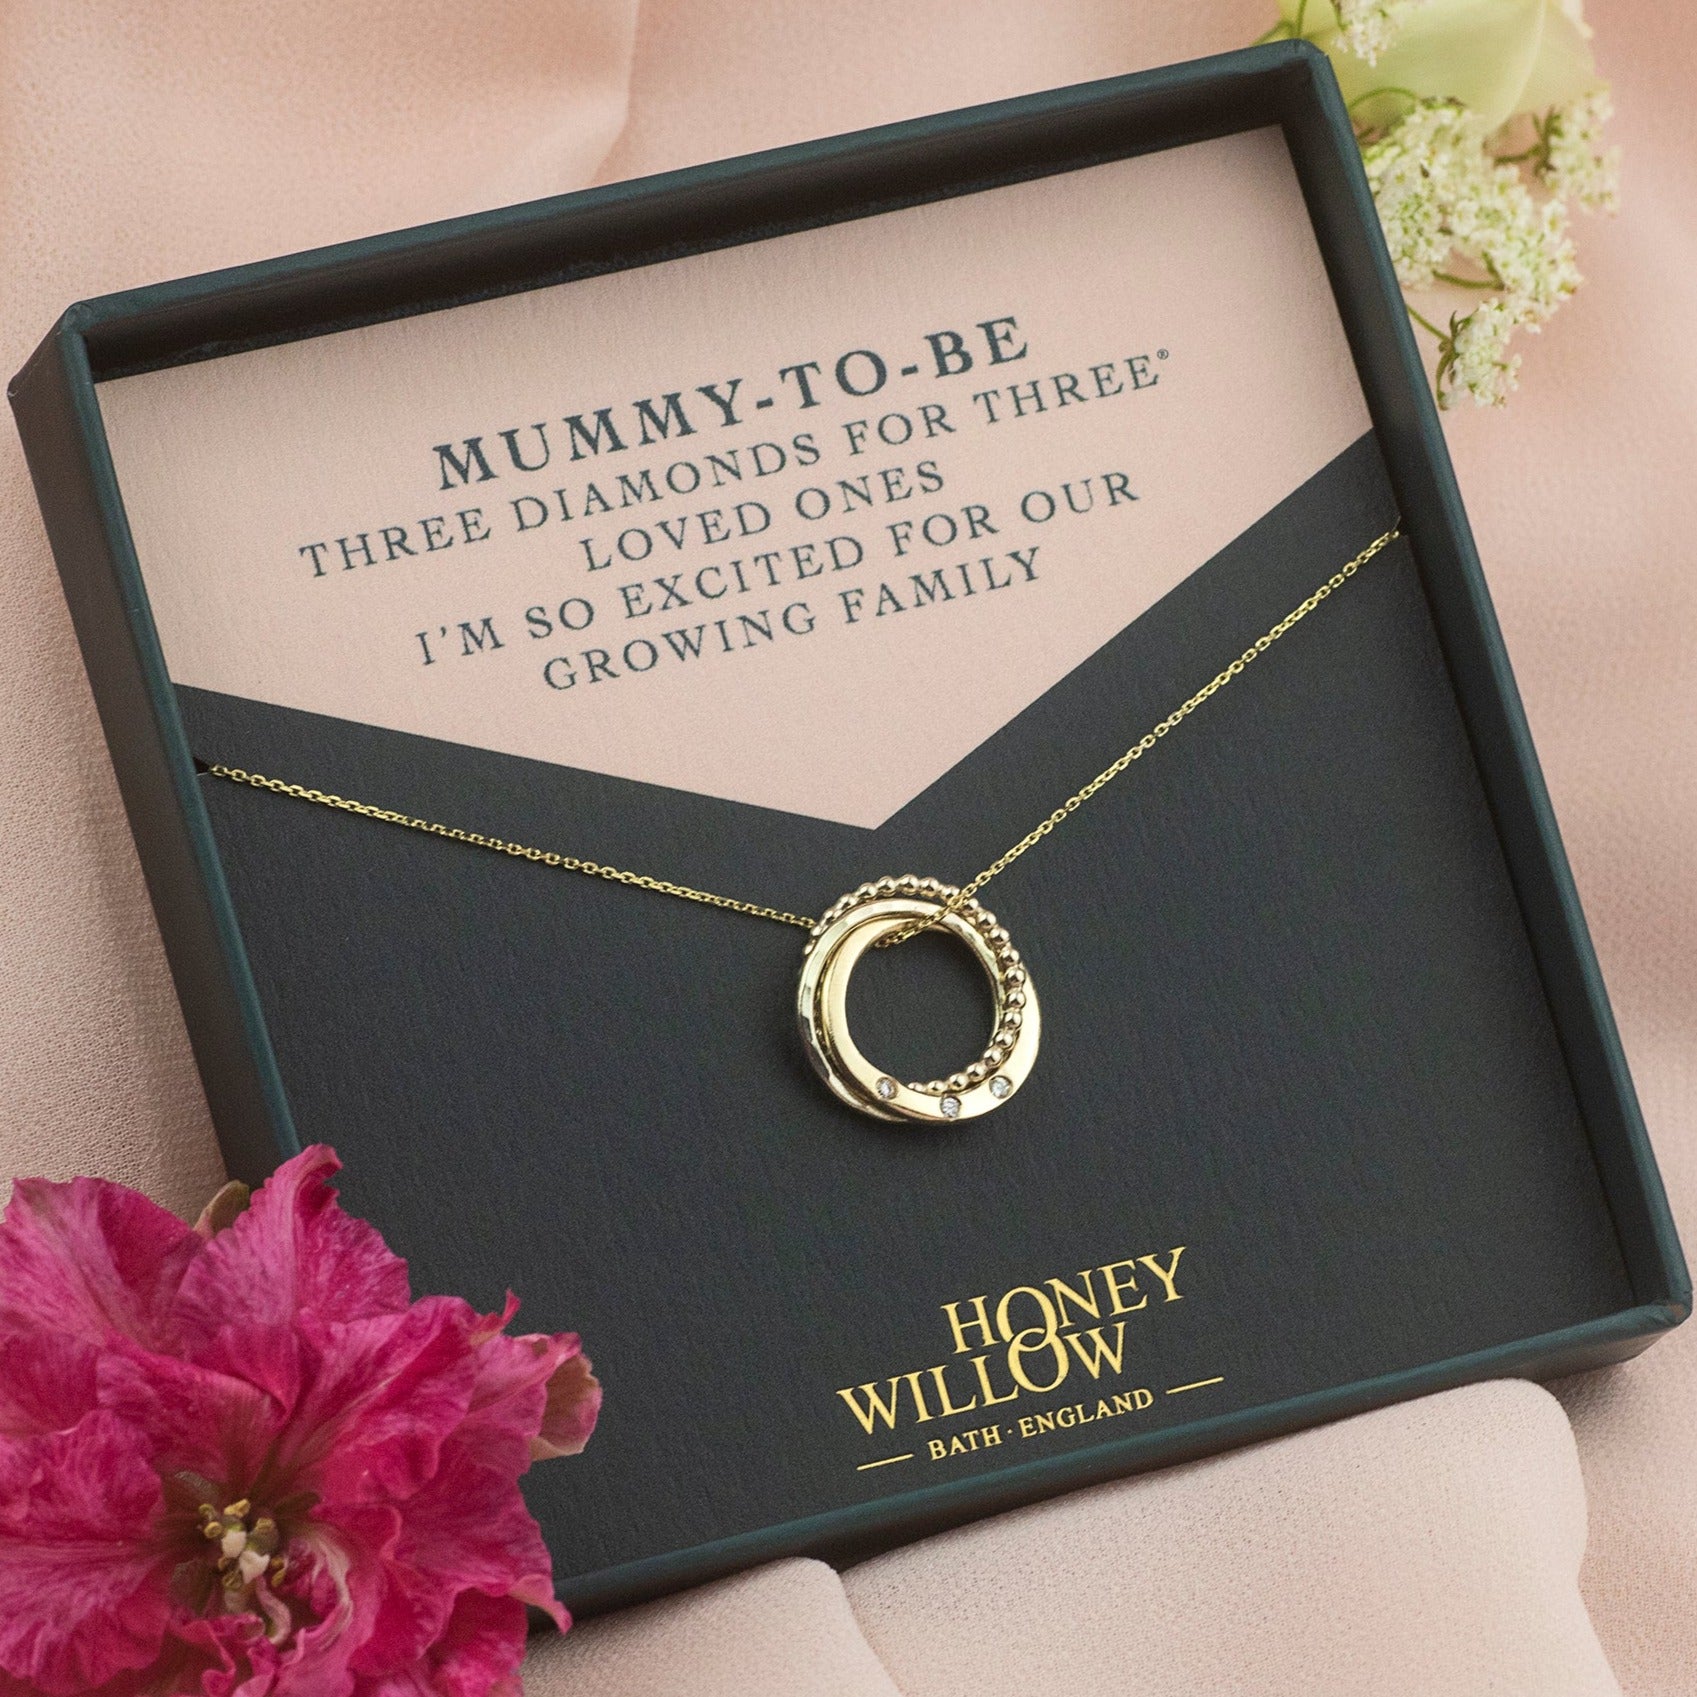 Gift for Mum to be - 9kt Gold Necklace - 3 Diamond for 3 Loved ones